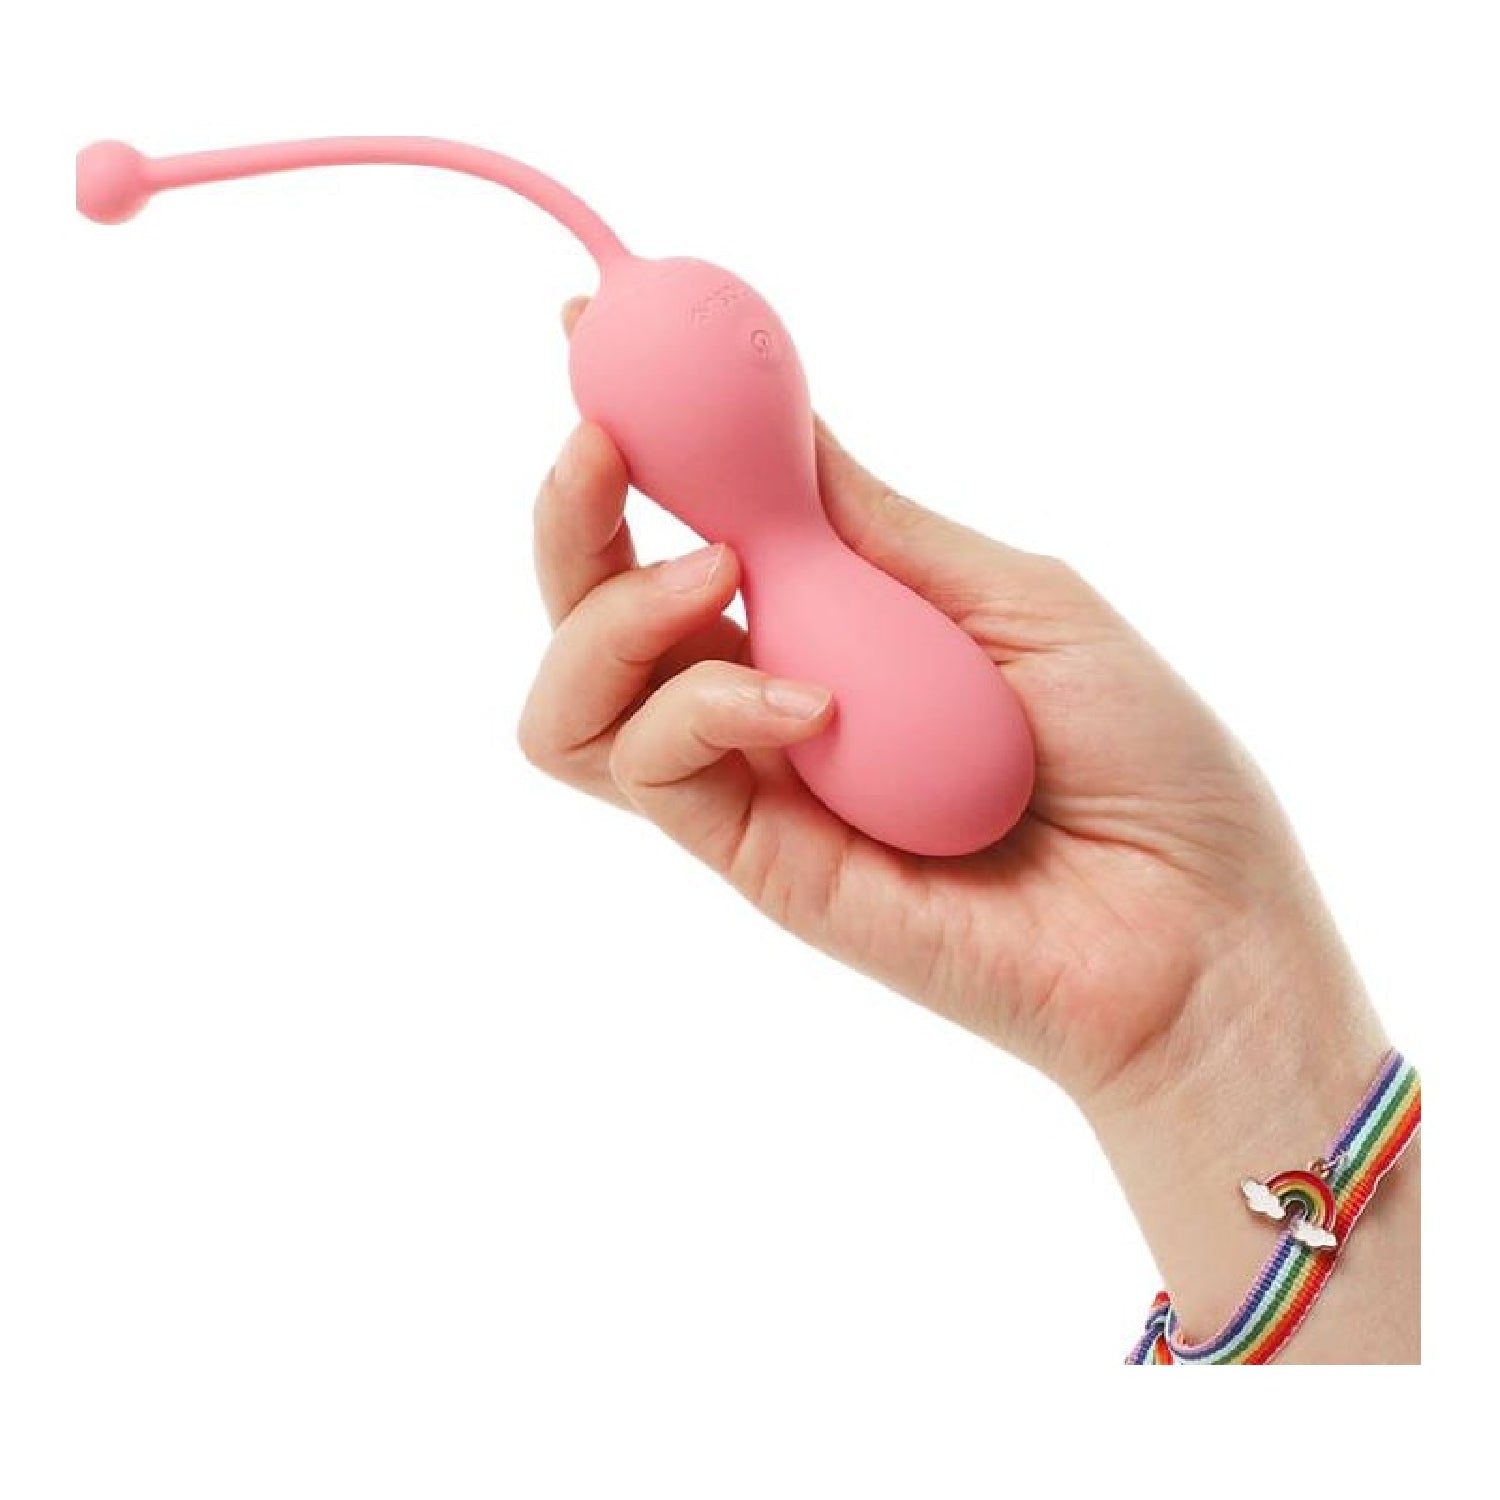 Duo Vaginal Balls Come Hither Stimulator with Remote - Kegelator - Pink